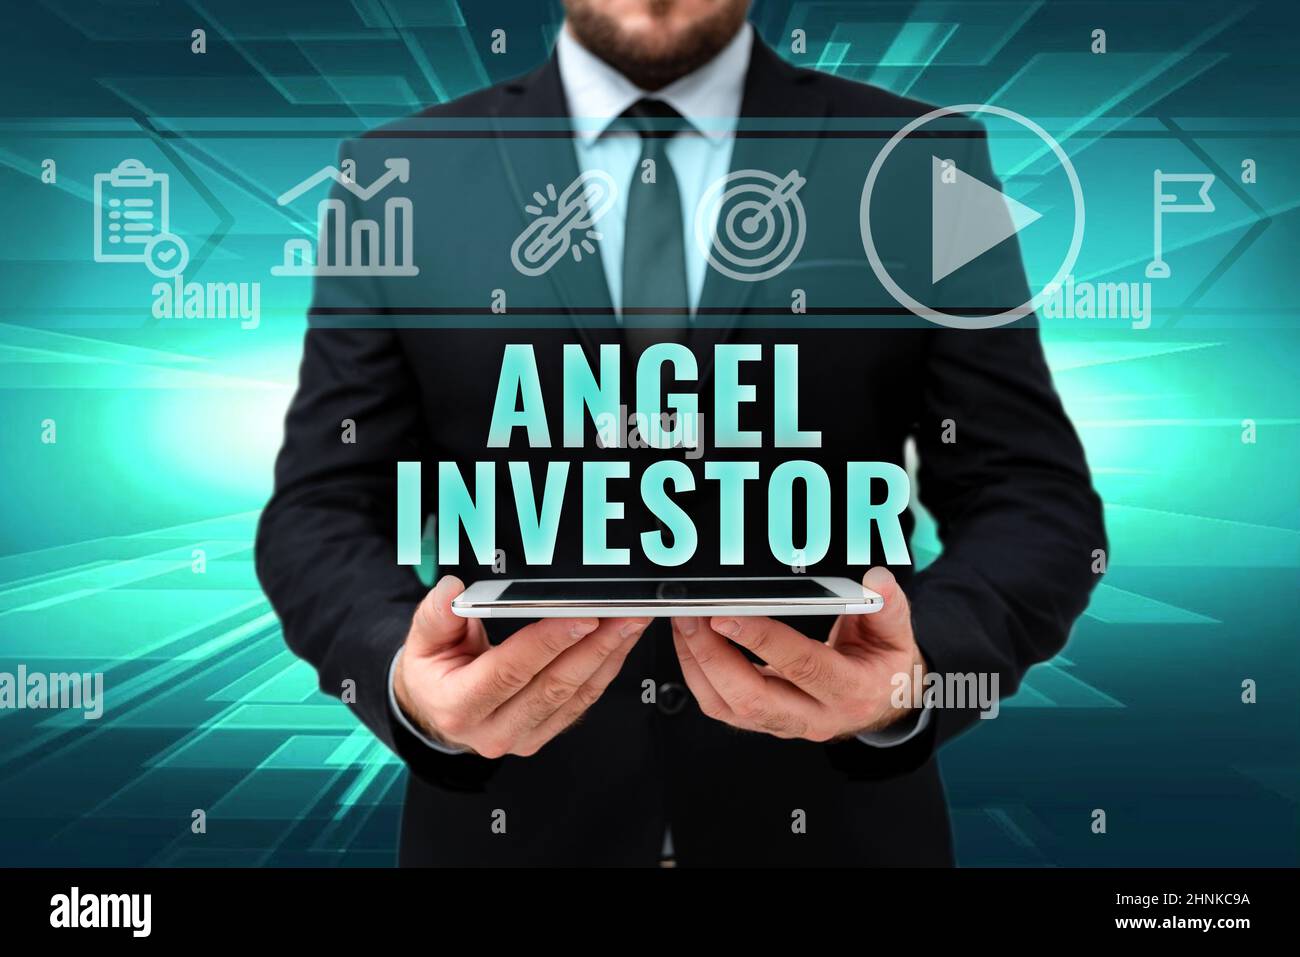 Sign displaying Angel Investor, Business approach high net worth individual who provides financial backing Man In Office Uniform Holding Tablet Displa Stock Photo